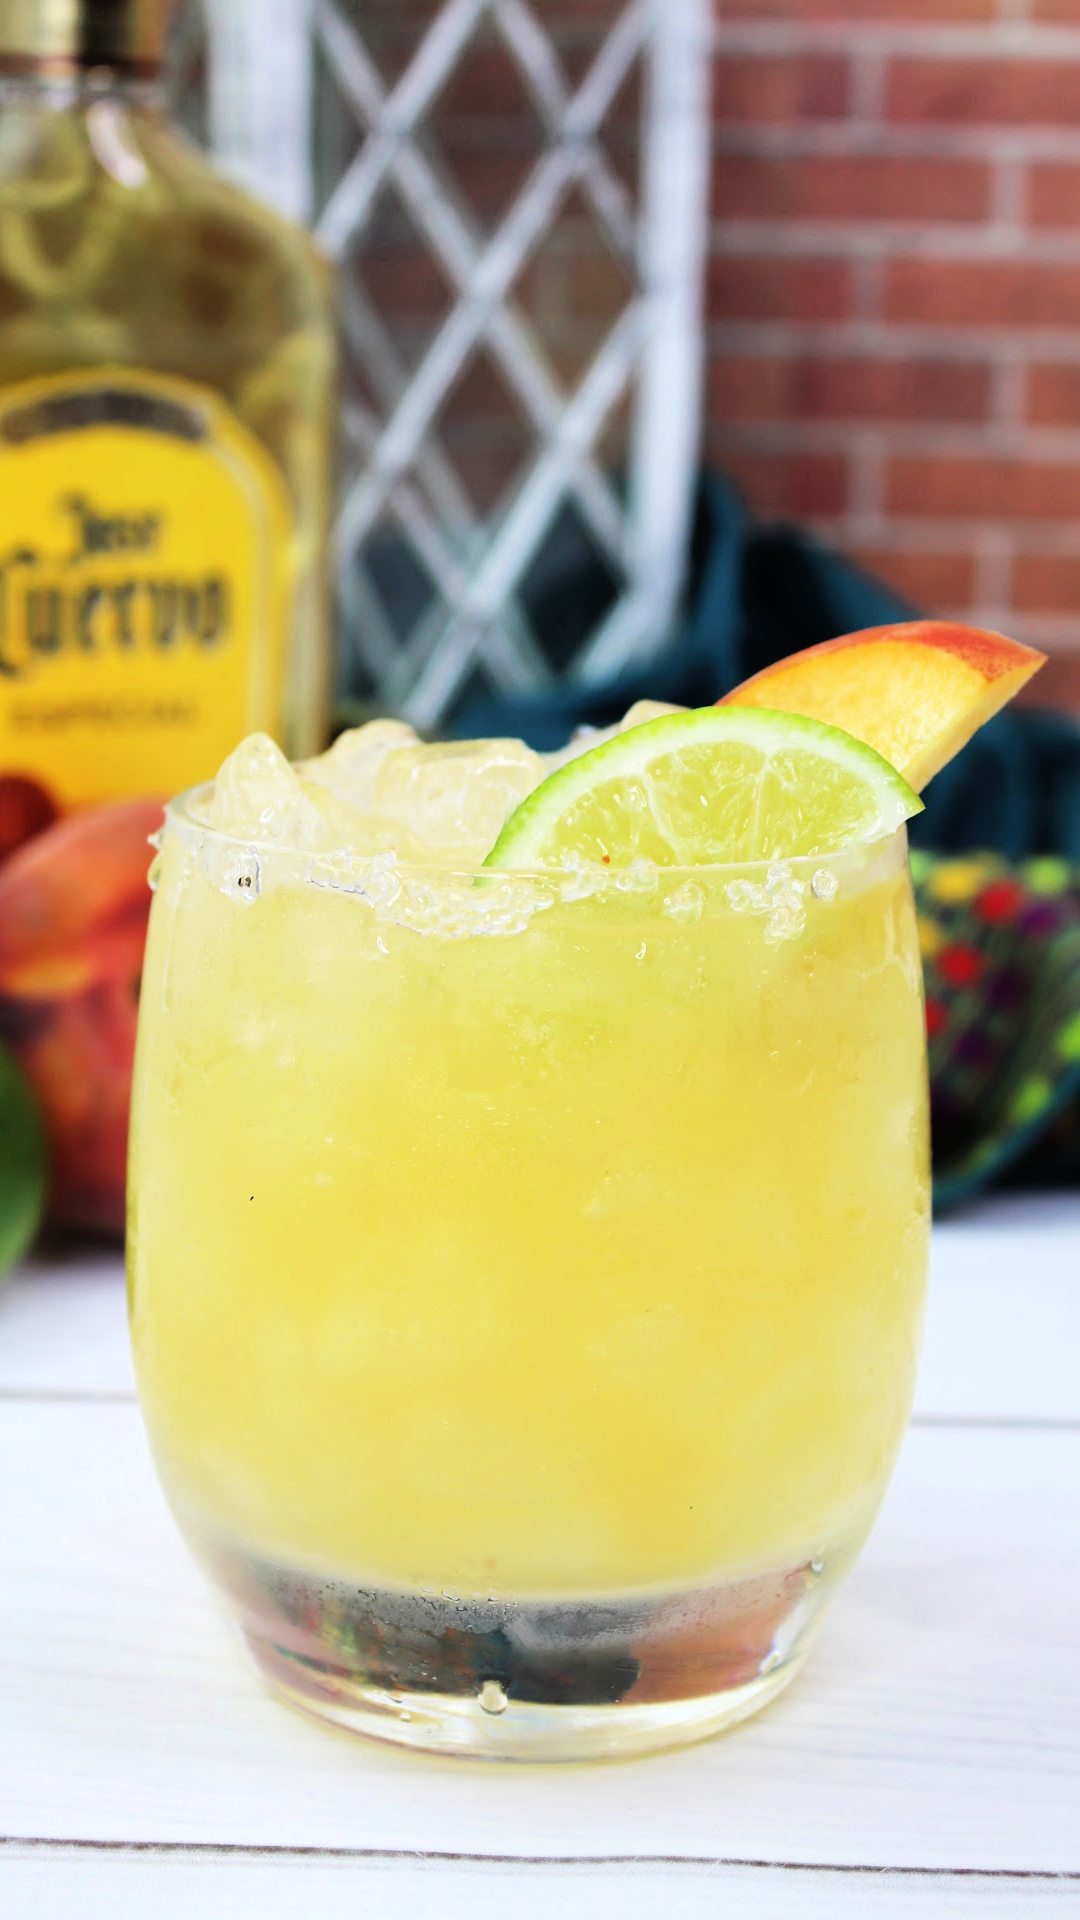 A peach margarita garnished with a slice of peach and a wedge of lime.